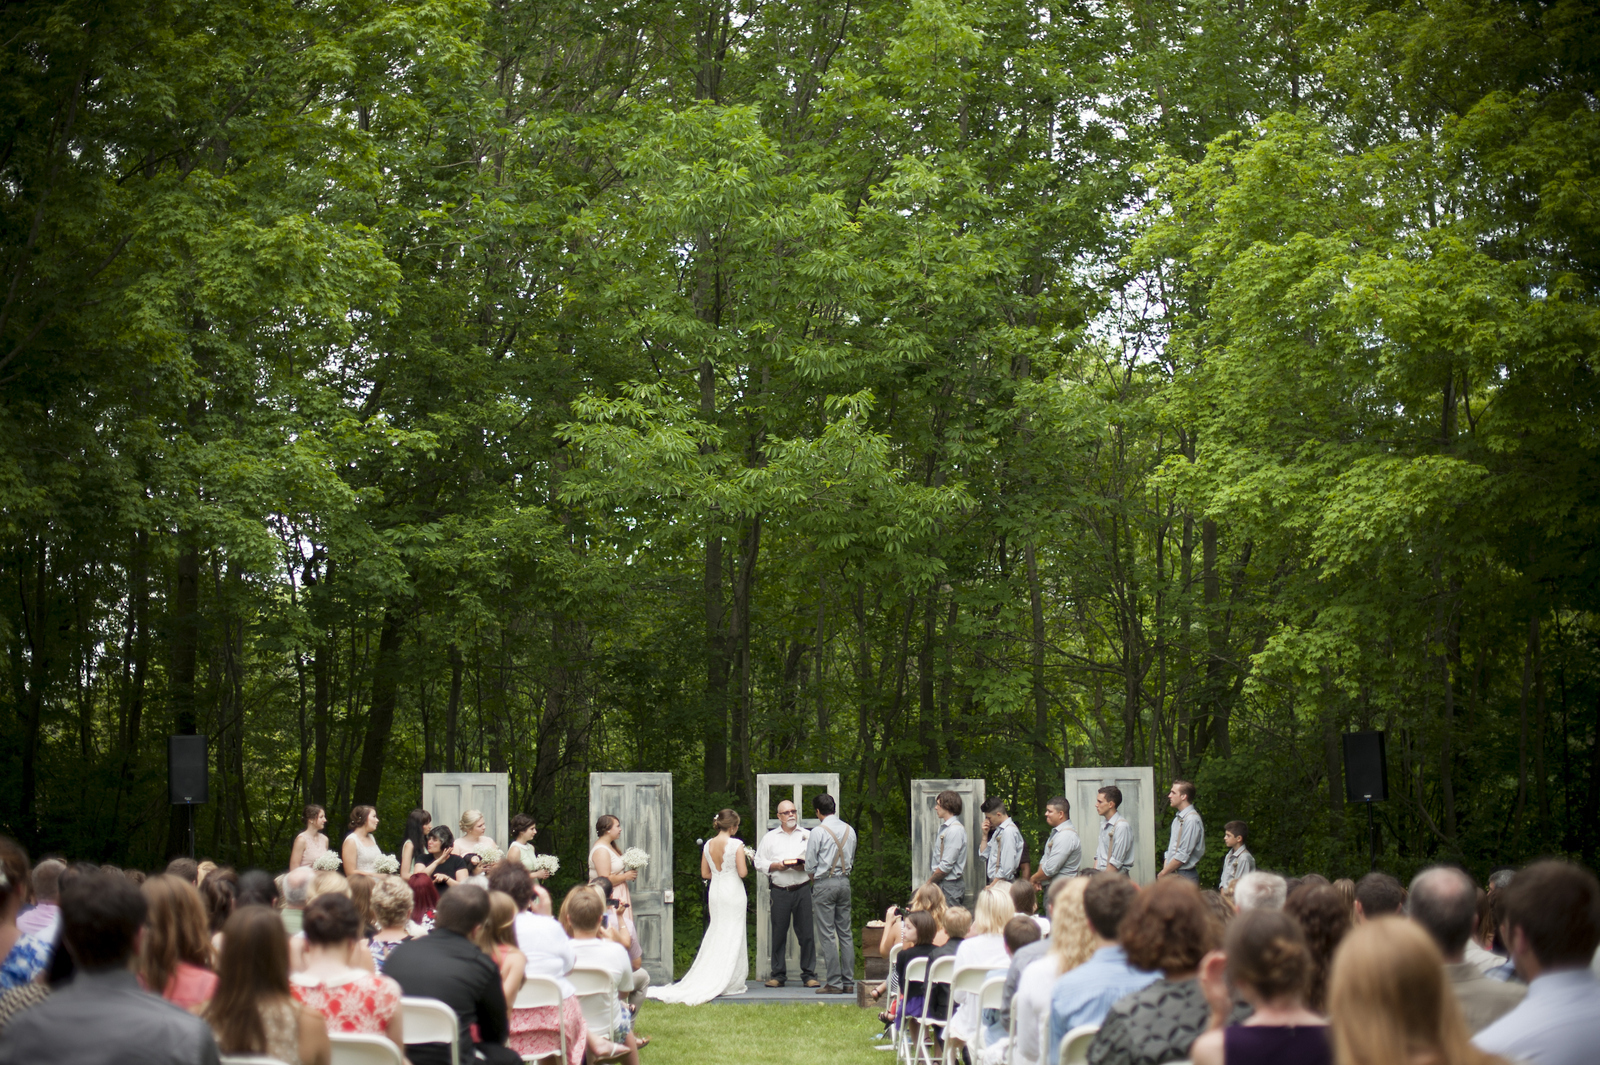 The Meadow is a wedding venue situated near a large copse of trees that surround a small lawn. At this weeding ceremony the bride and groom used old distressed doors as a back drop to their alter. 